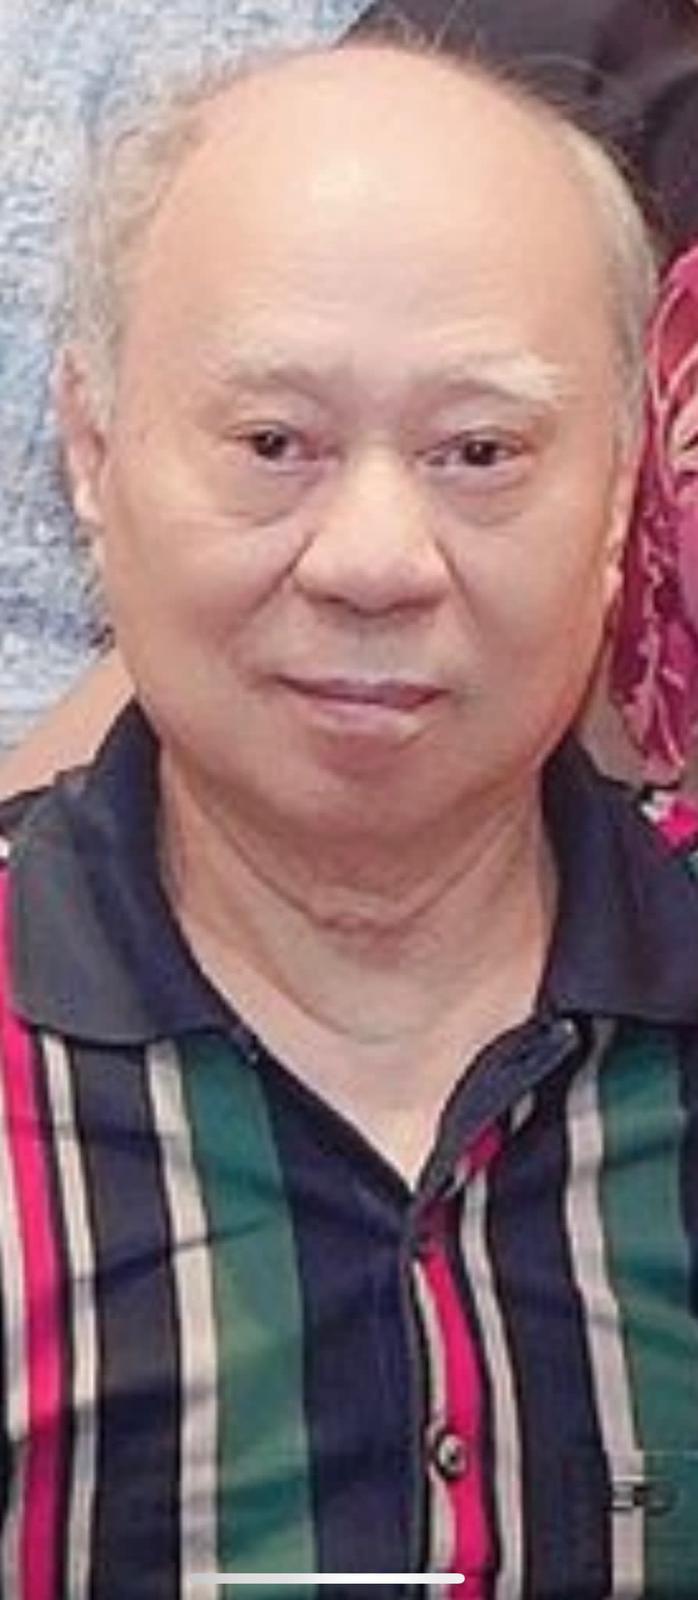 Wat Sar-wan, aged 83,is about 1.55 metres tall, 50 kilograms in weight and of medium build. He has a round face with yellow complexion and short white hair. He was last seen wearing a black long-sleeved shirt, black shorts and black shoes.